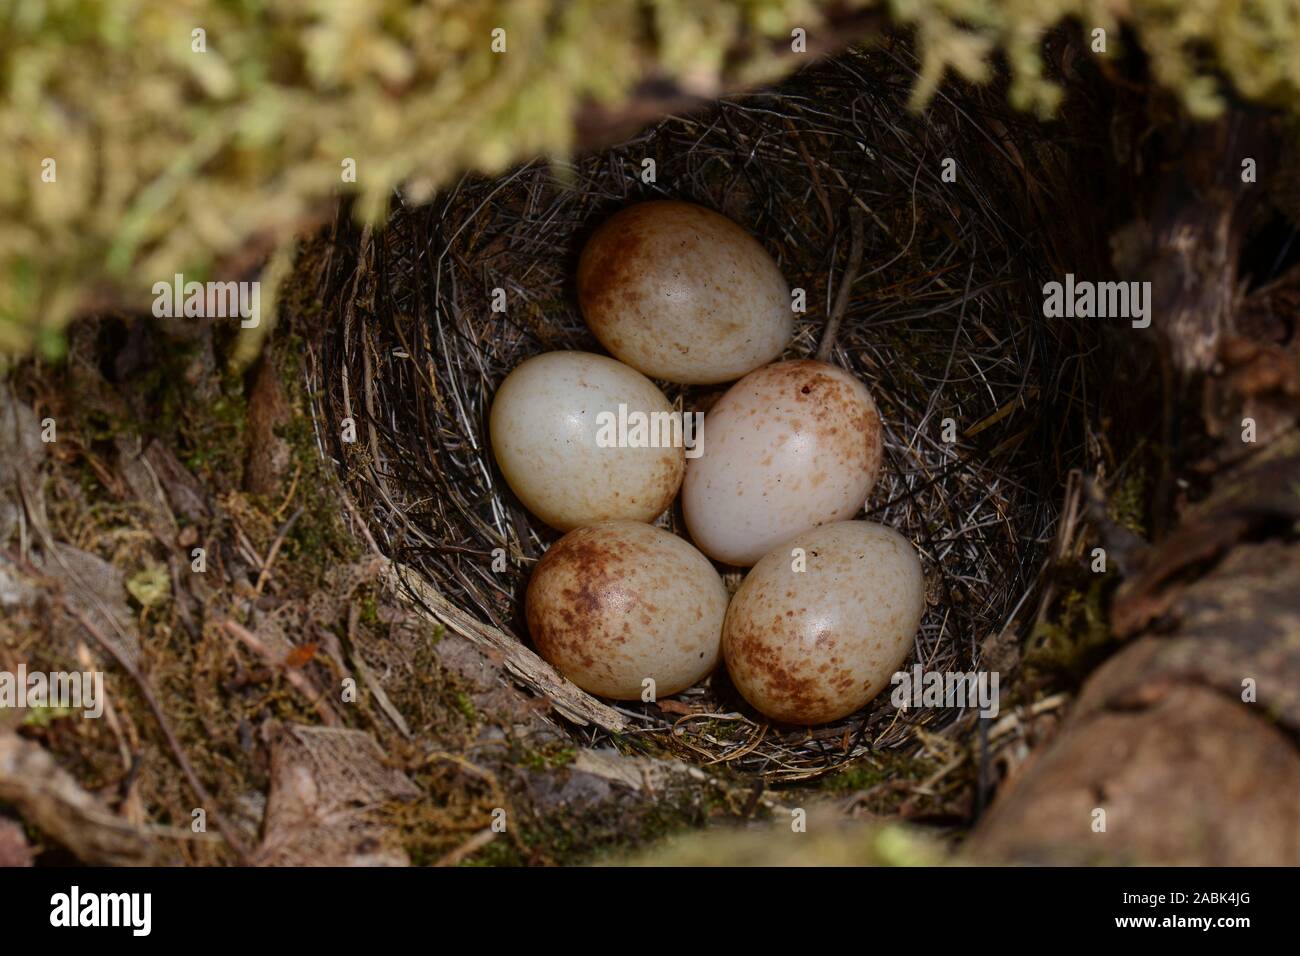 Robin (Erithacus rubeculas),. Clutch in a cavity of a mossy tree stump. Sweden Stock Photo